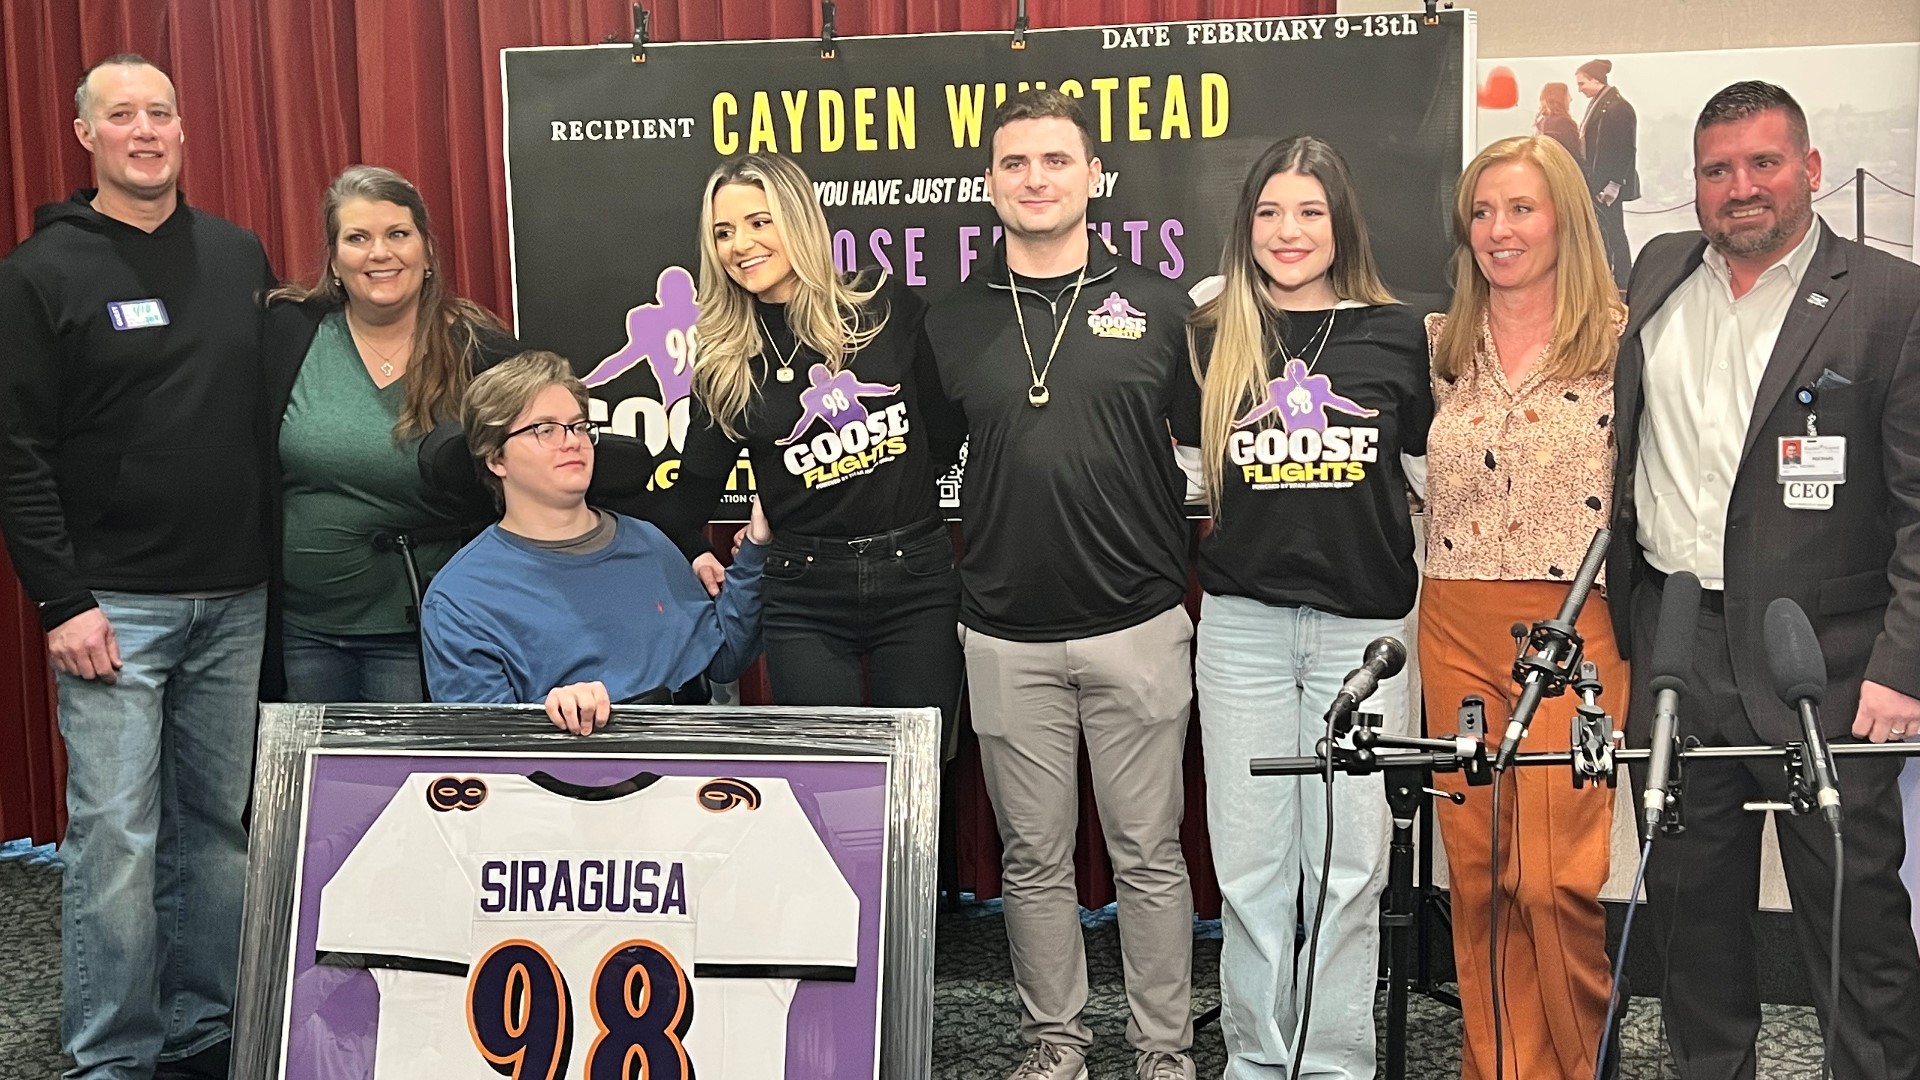 Cayden Winstead, 23, suffered a severe brain injury almost a year ago -- now he's receiving the gift of a lifetime.